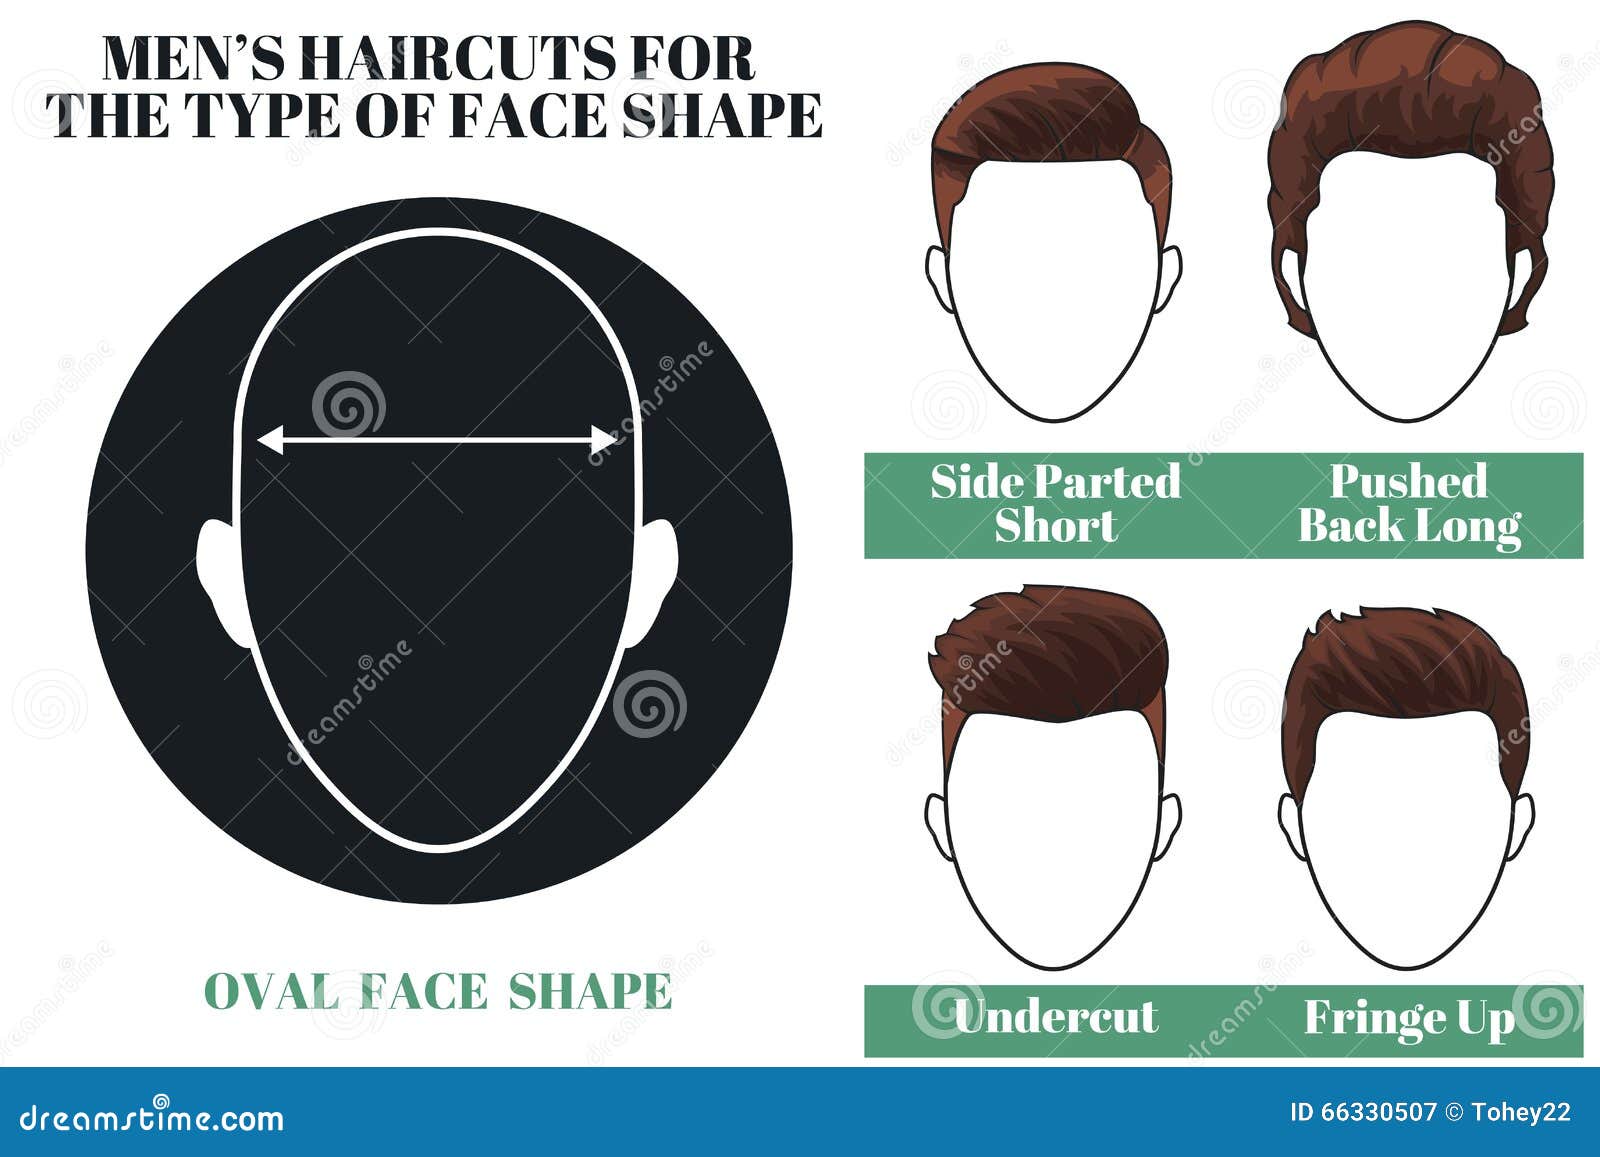 5 Best Hairstyles For Oval Face Shape | Oval Face Hairstyles For Men | Hairstyle  For Men | Oval Face - YouTube